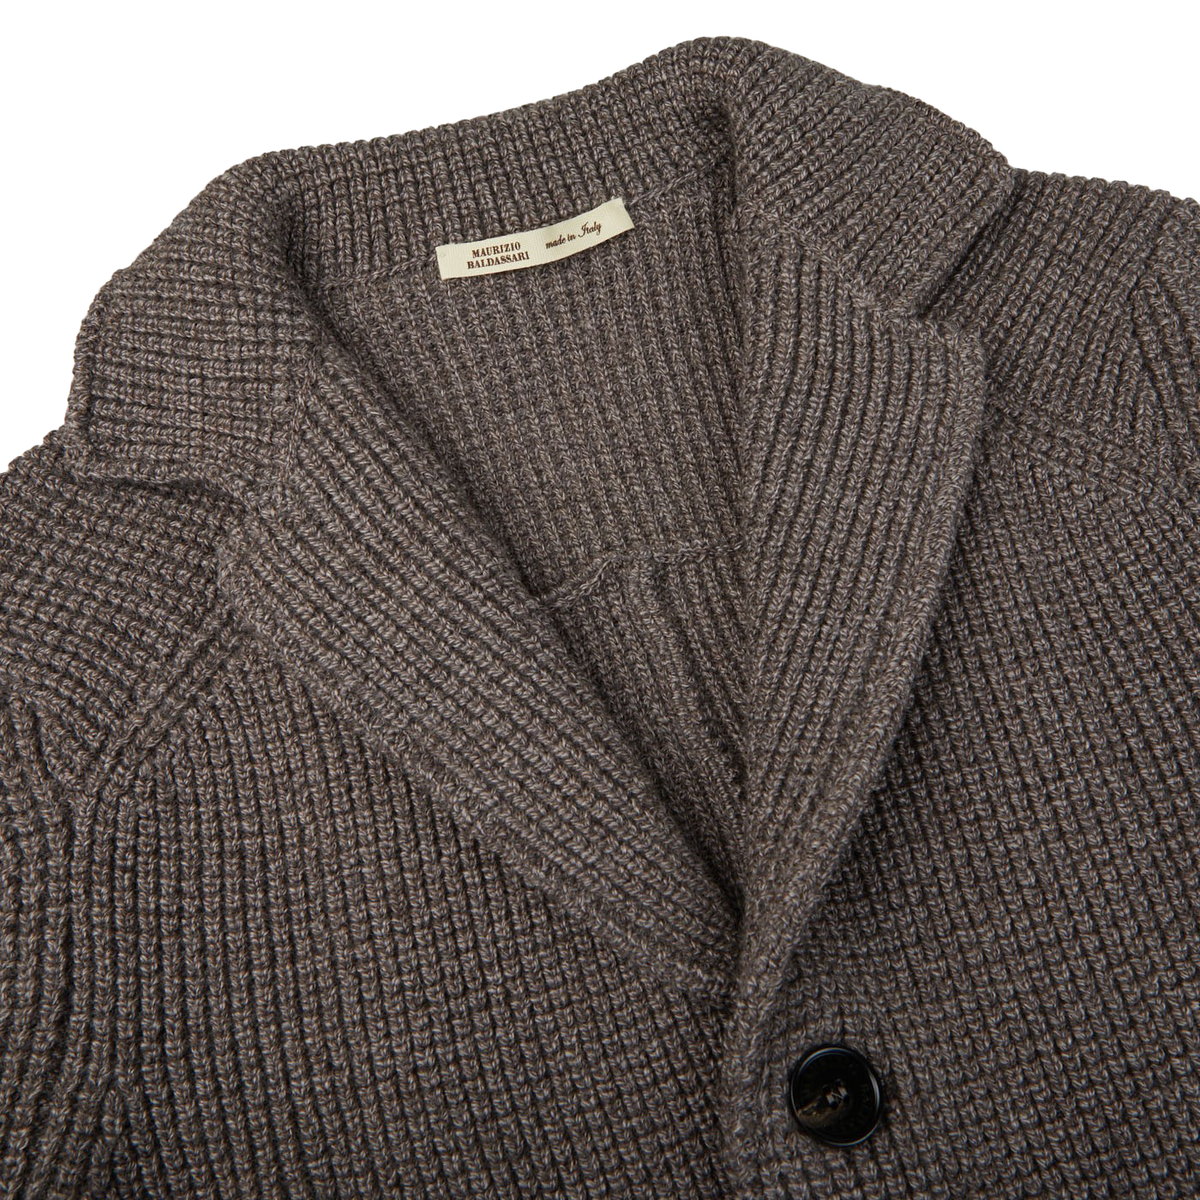 GREY KNITTED JACKET – WOOL AND CASHMERE, Made in Italy